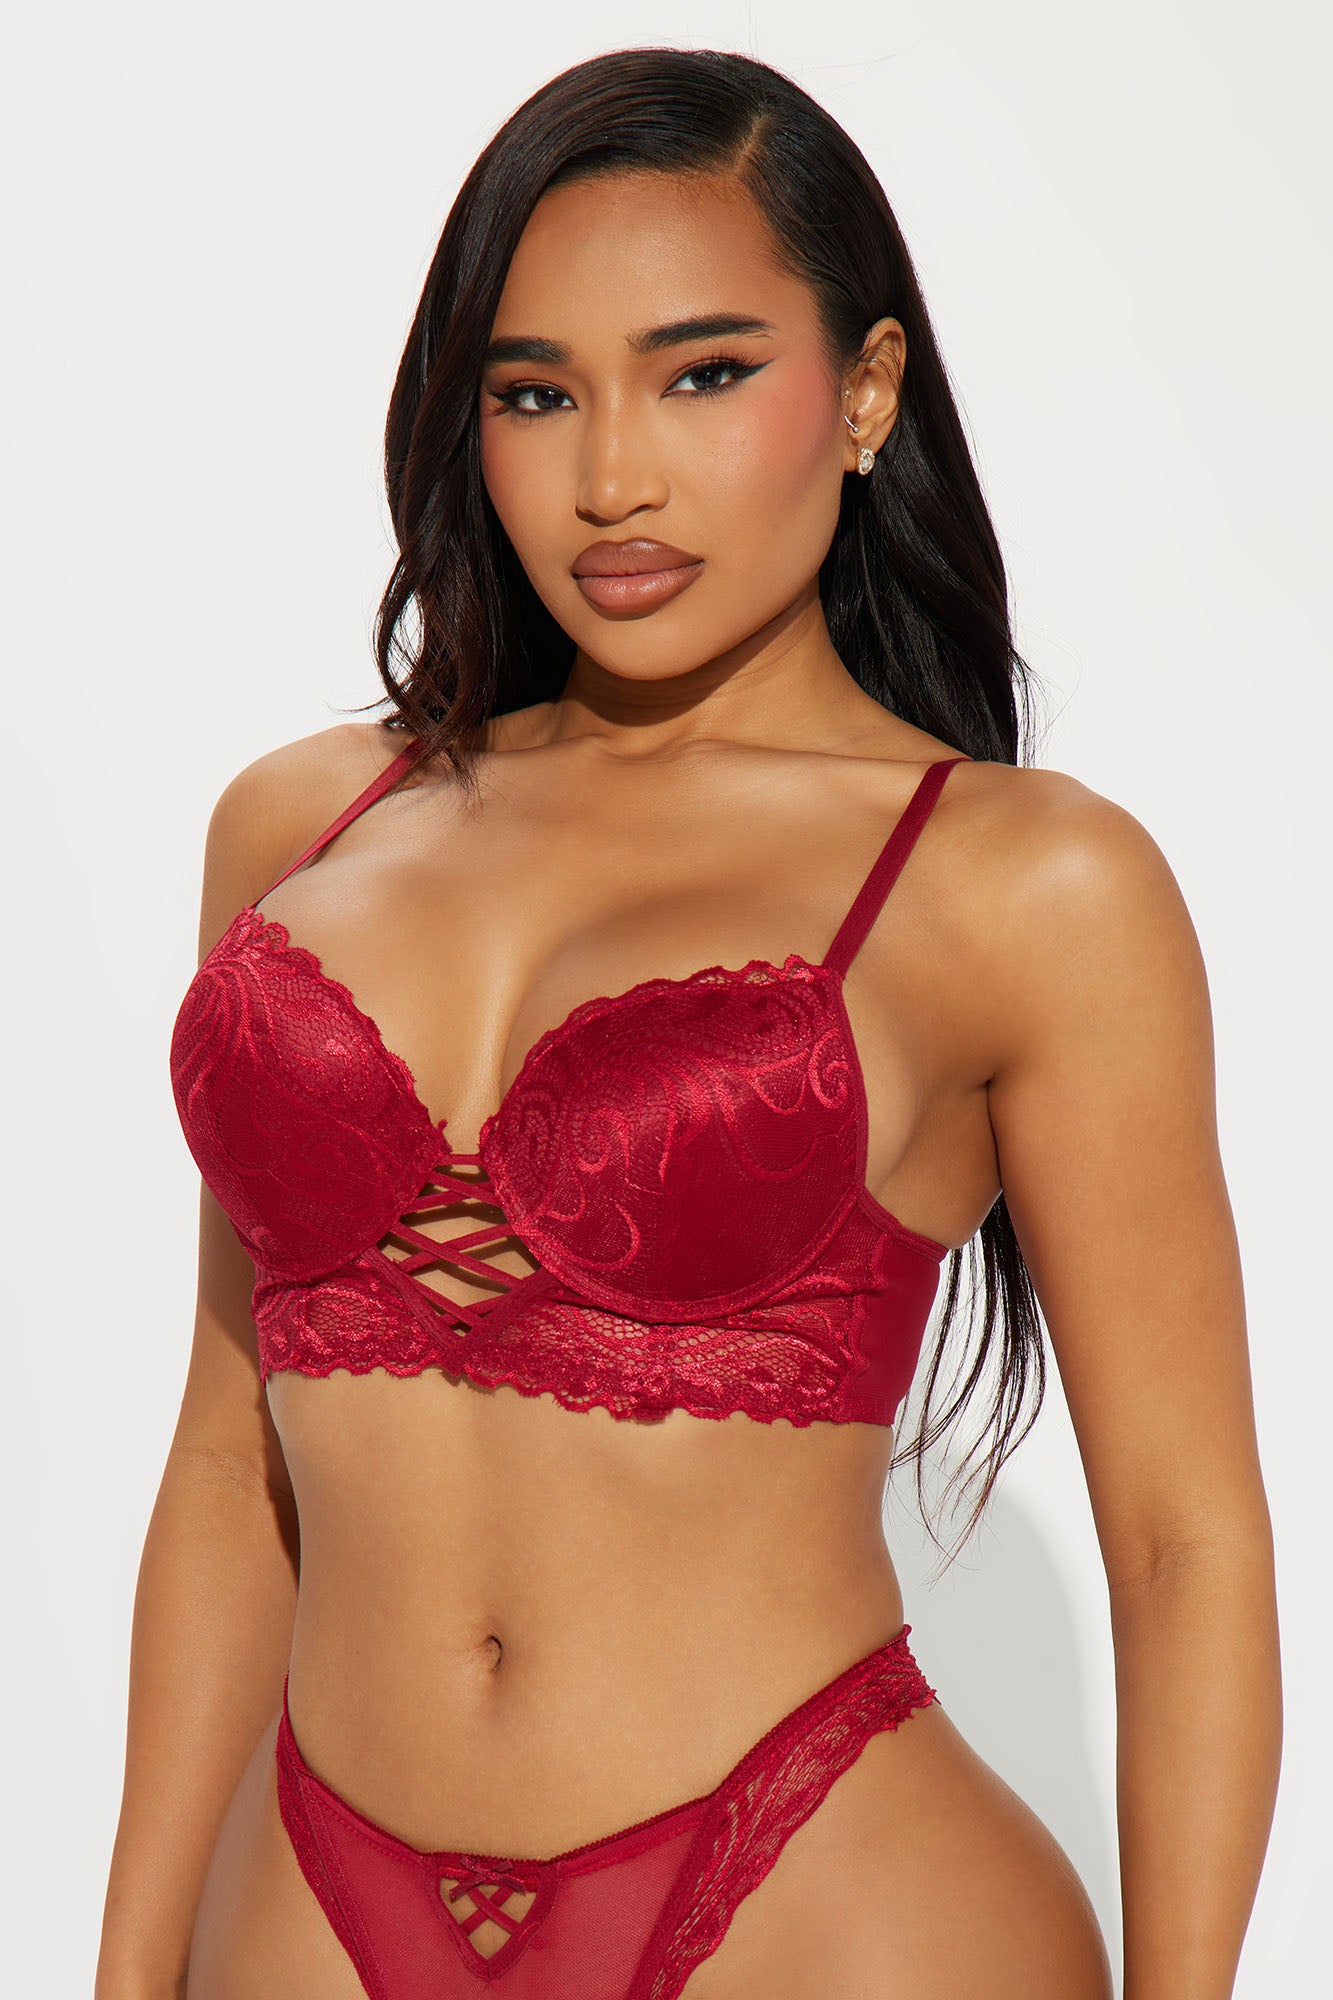 New Longline Bra With Charm 😍 ➡️ Currently available in sizes 36D, 36